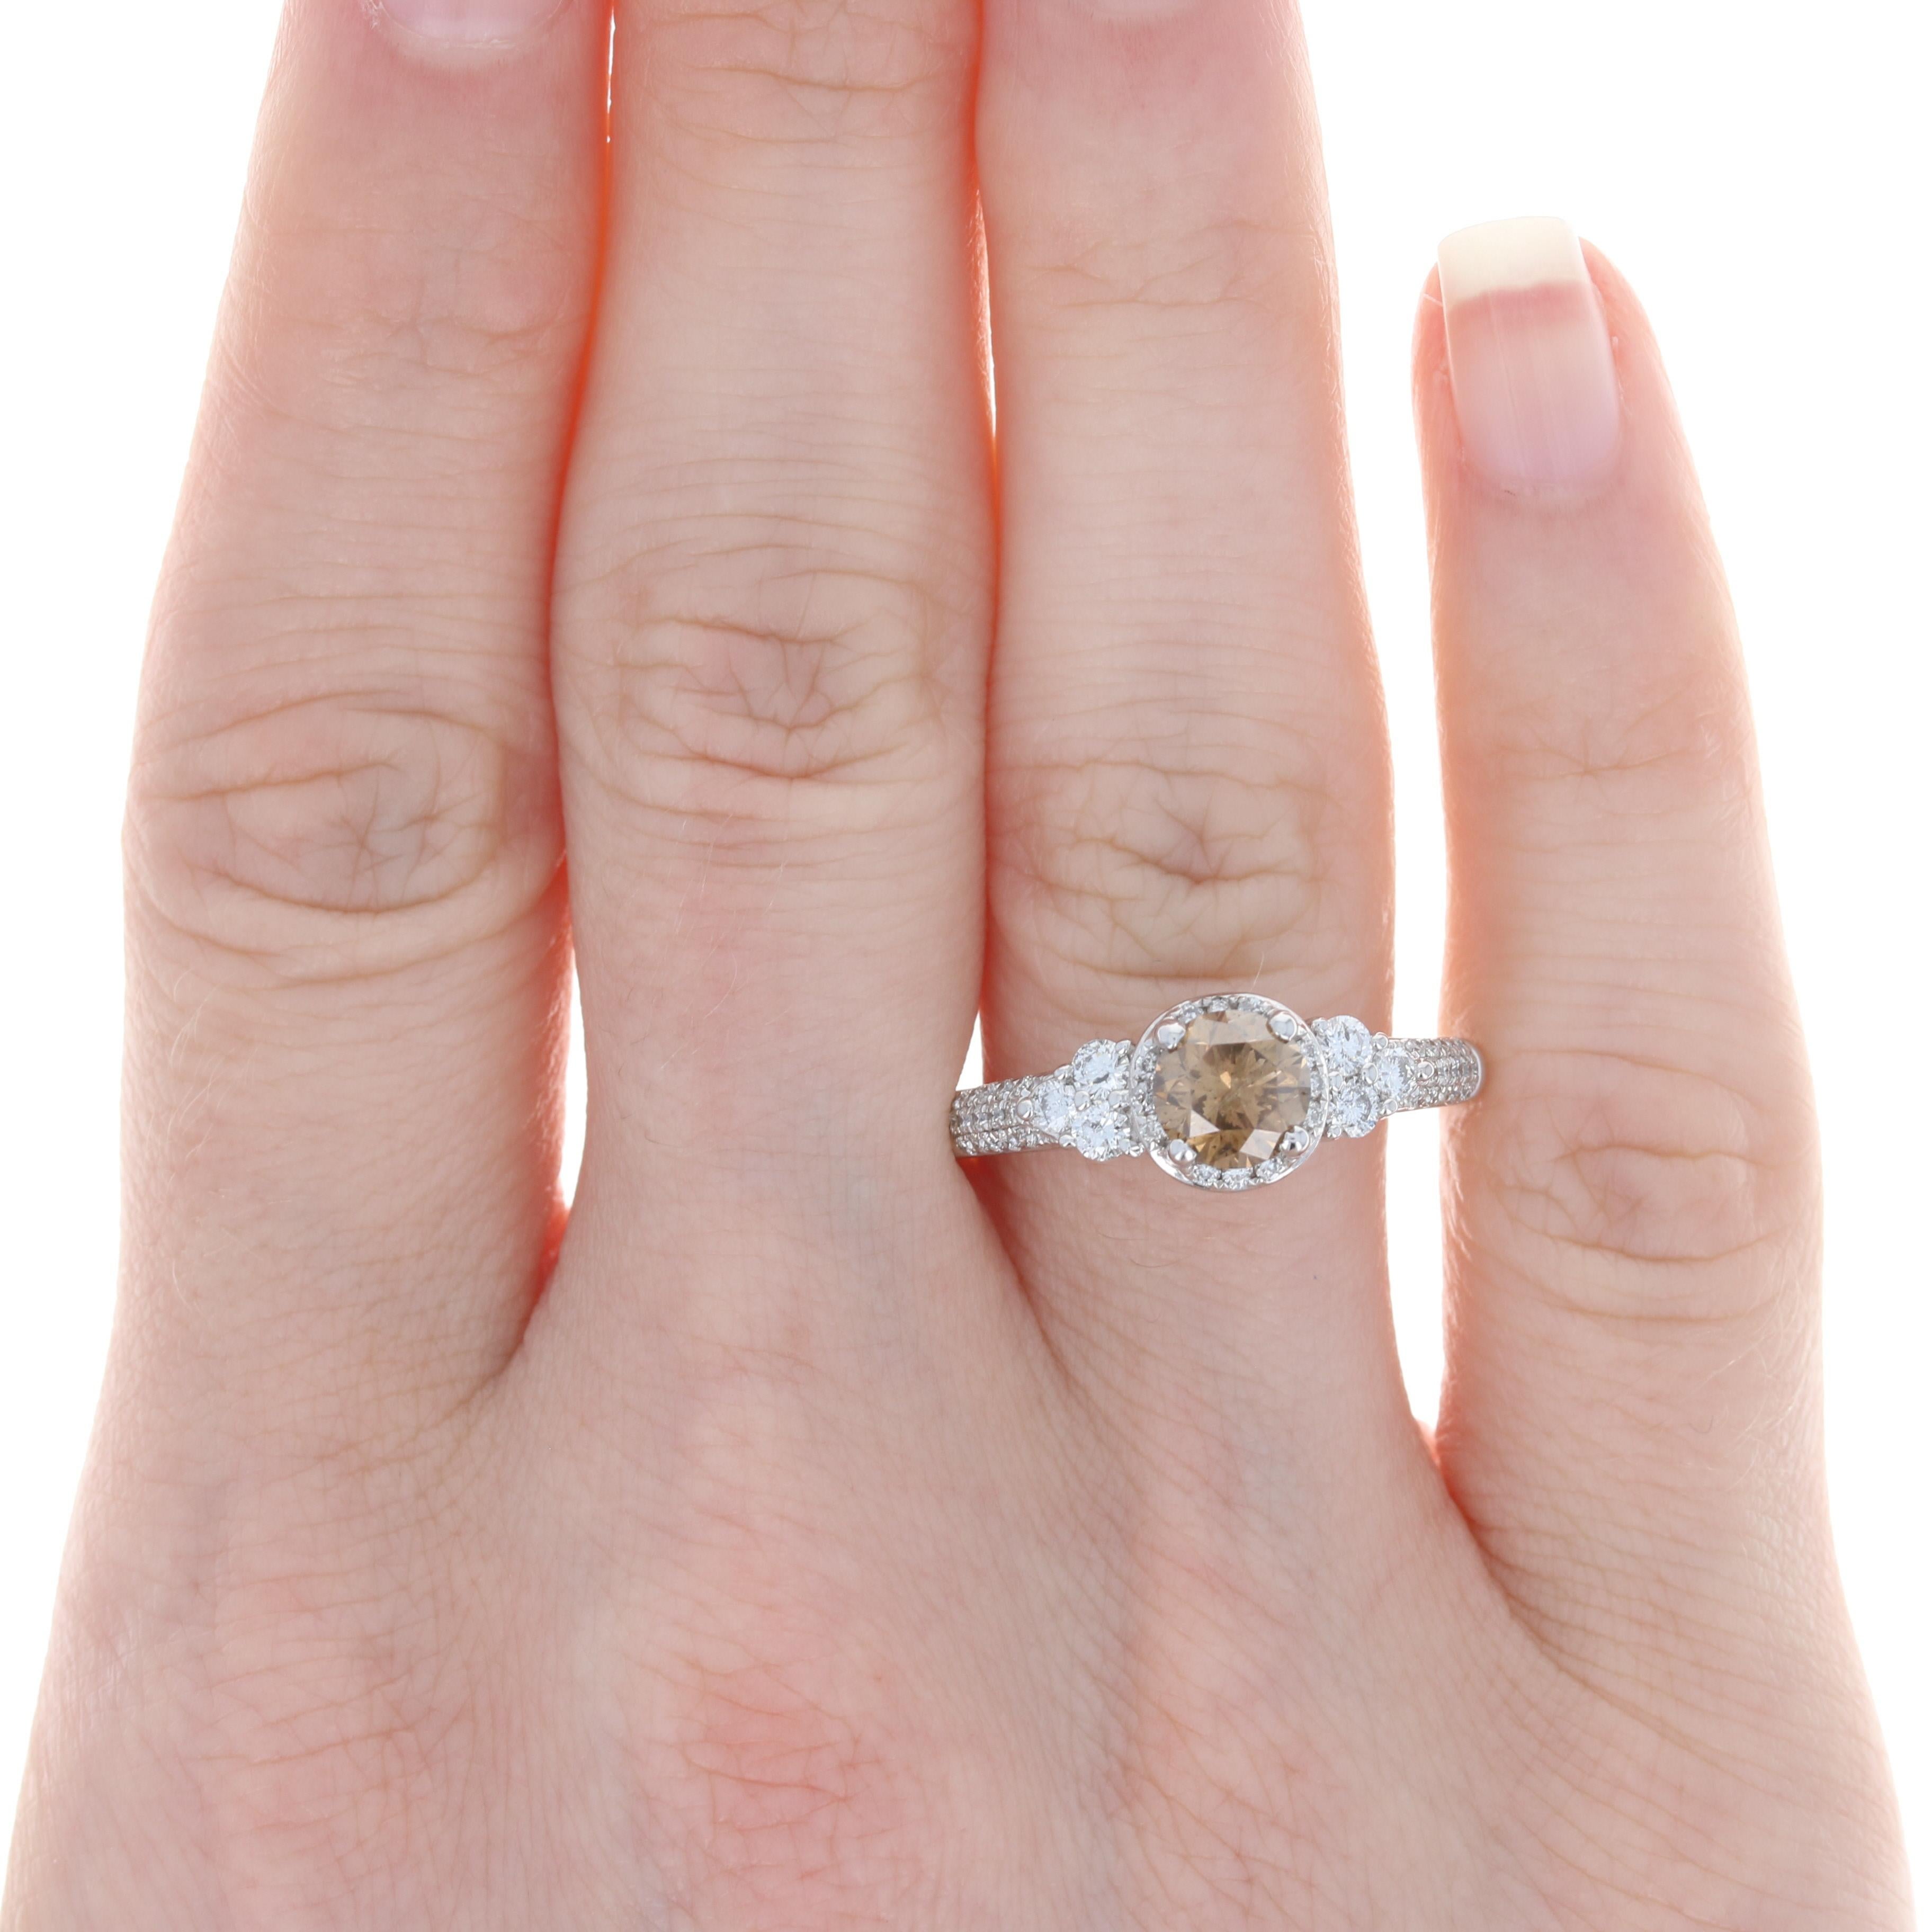 For Sale:  Diamond Engagement Ring, 14k White Gold Fancy Brown & White Genuine 1.54ctw 2